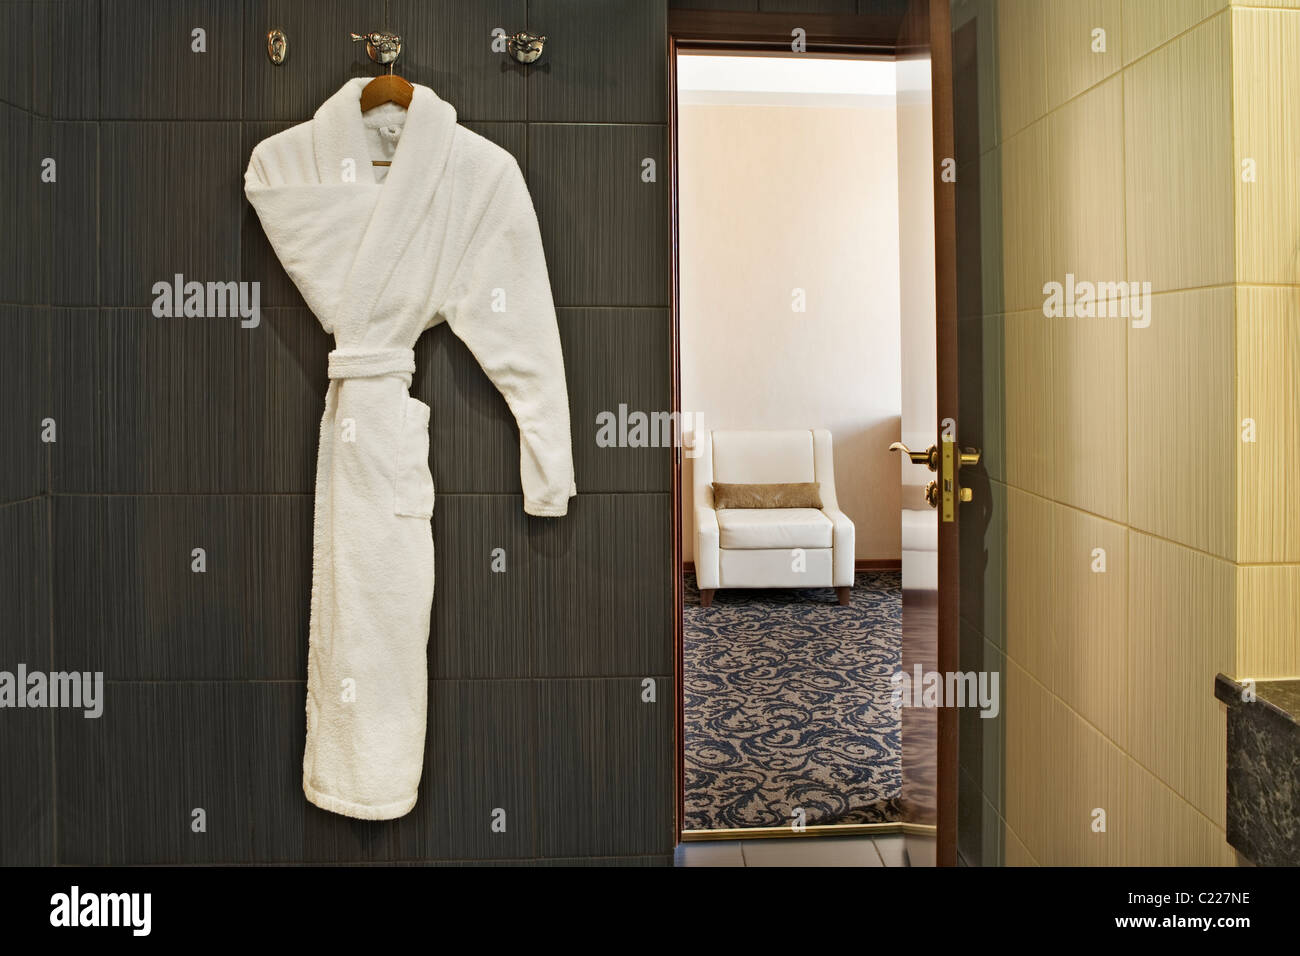 Interior of a hotel room with a white dressing gown hanging up and the door open with a view through to the next room Stock Photo